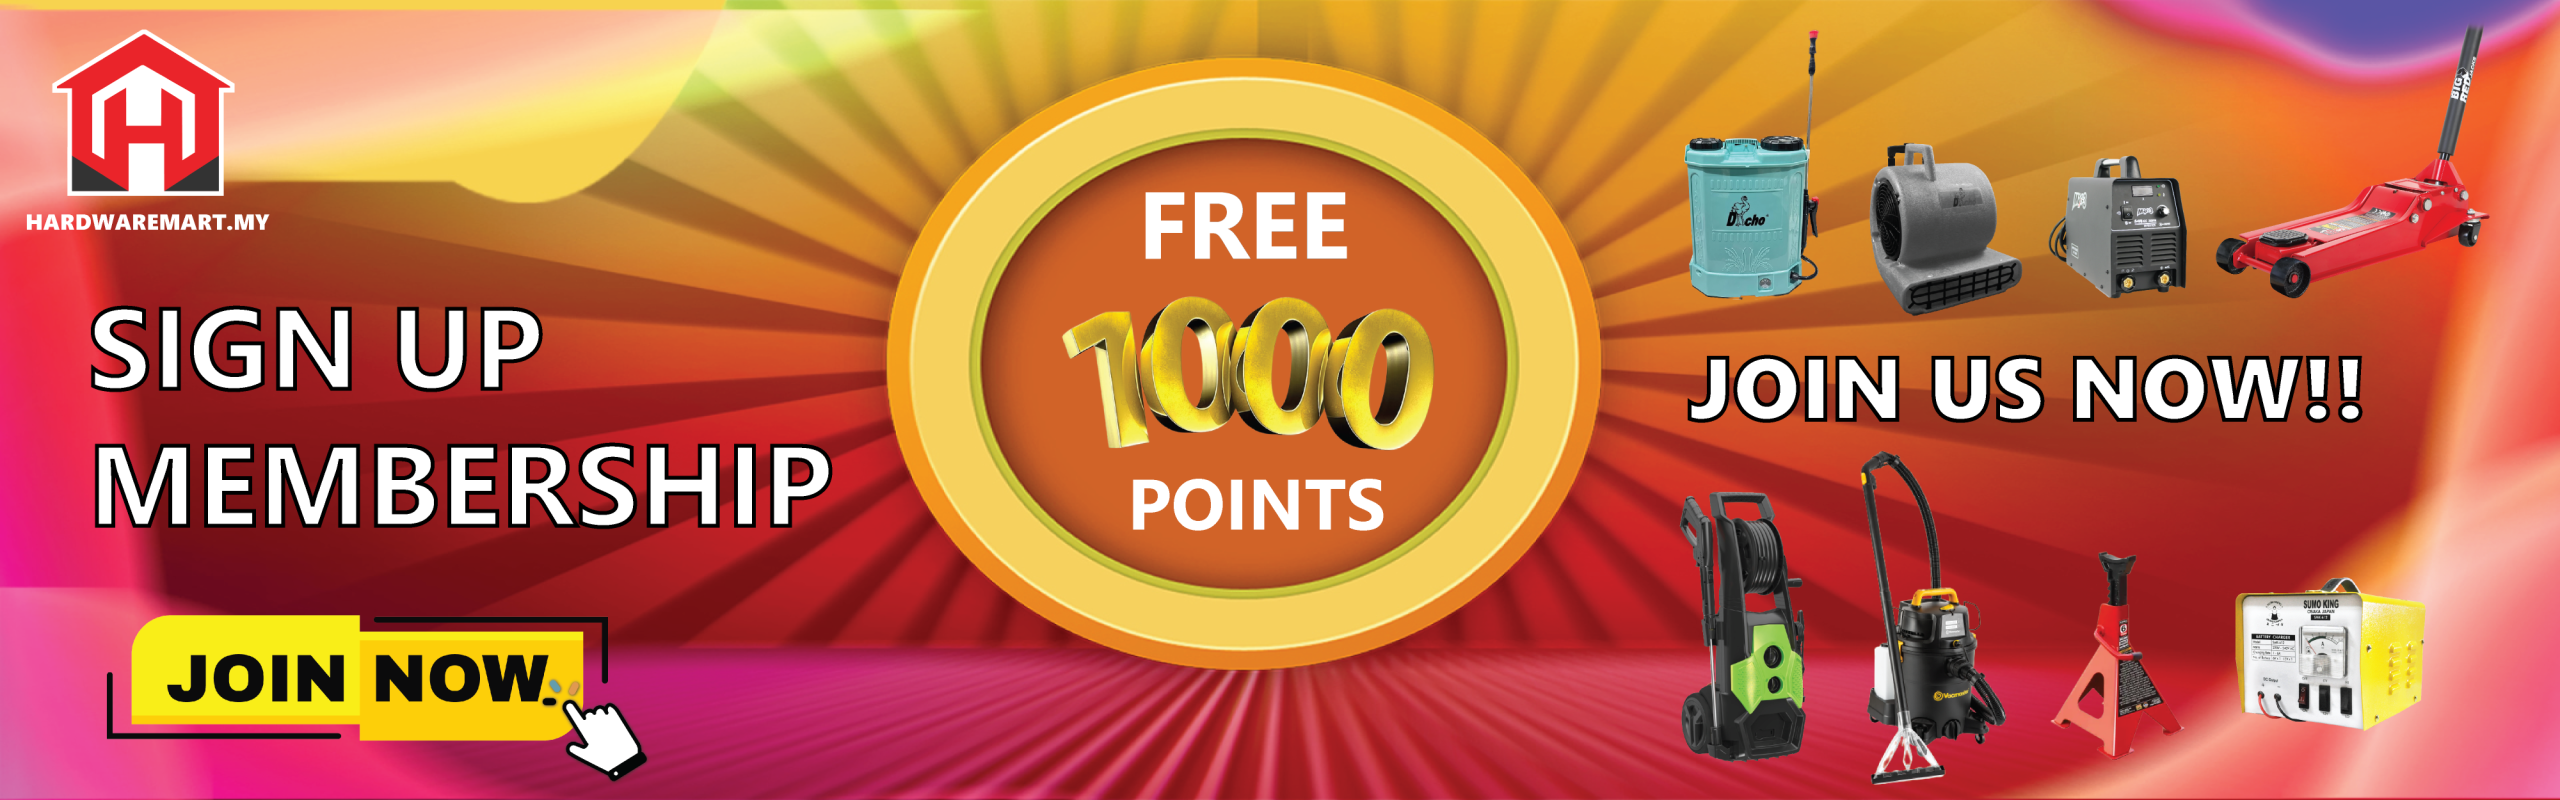 Sign up as HWM MEMBER and get 1000 member points!